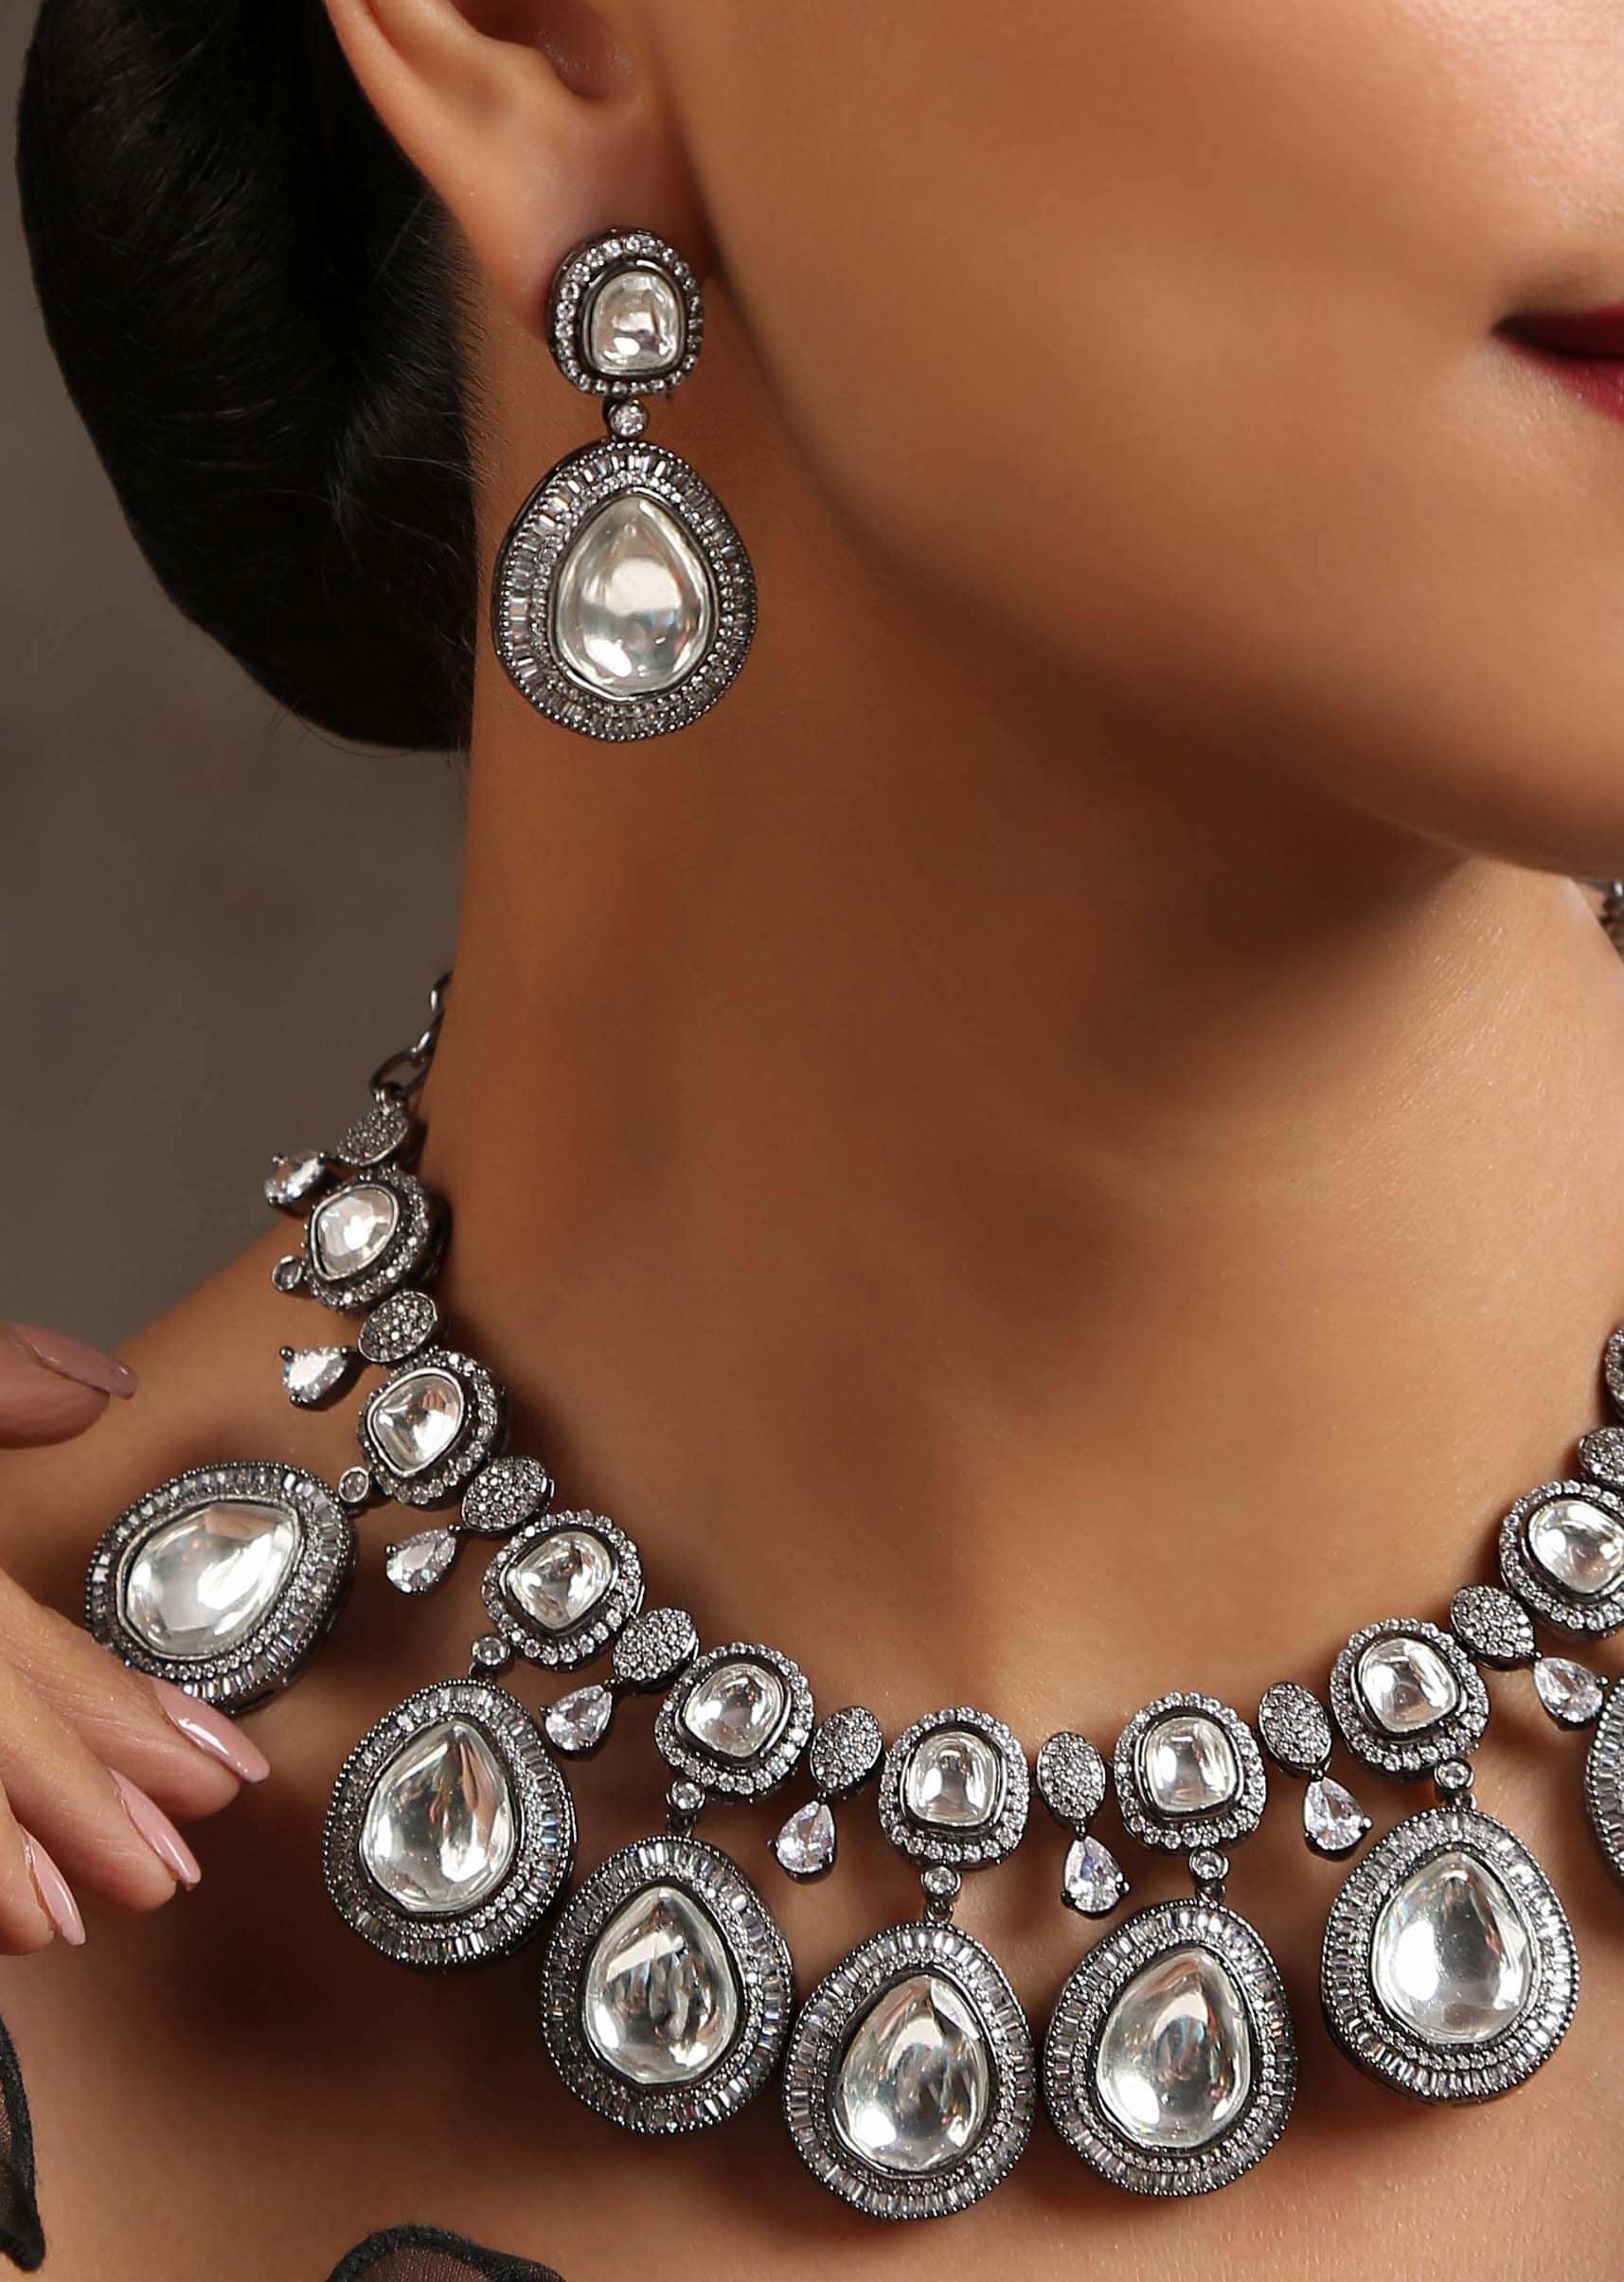 Silver Necklace With Kundan Polki In A Contemporary Design Along With Zirconia Stones